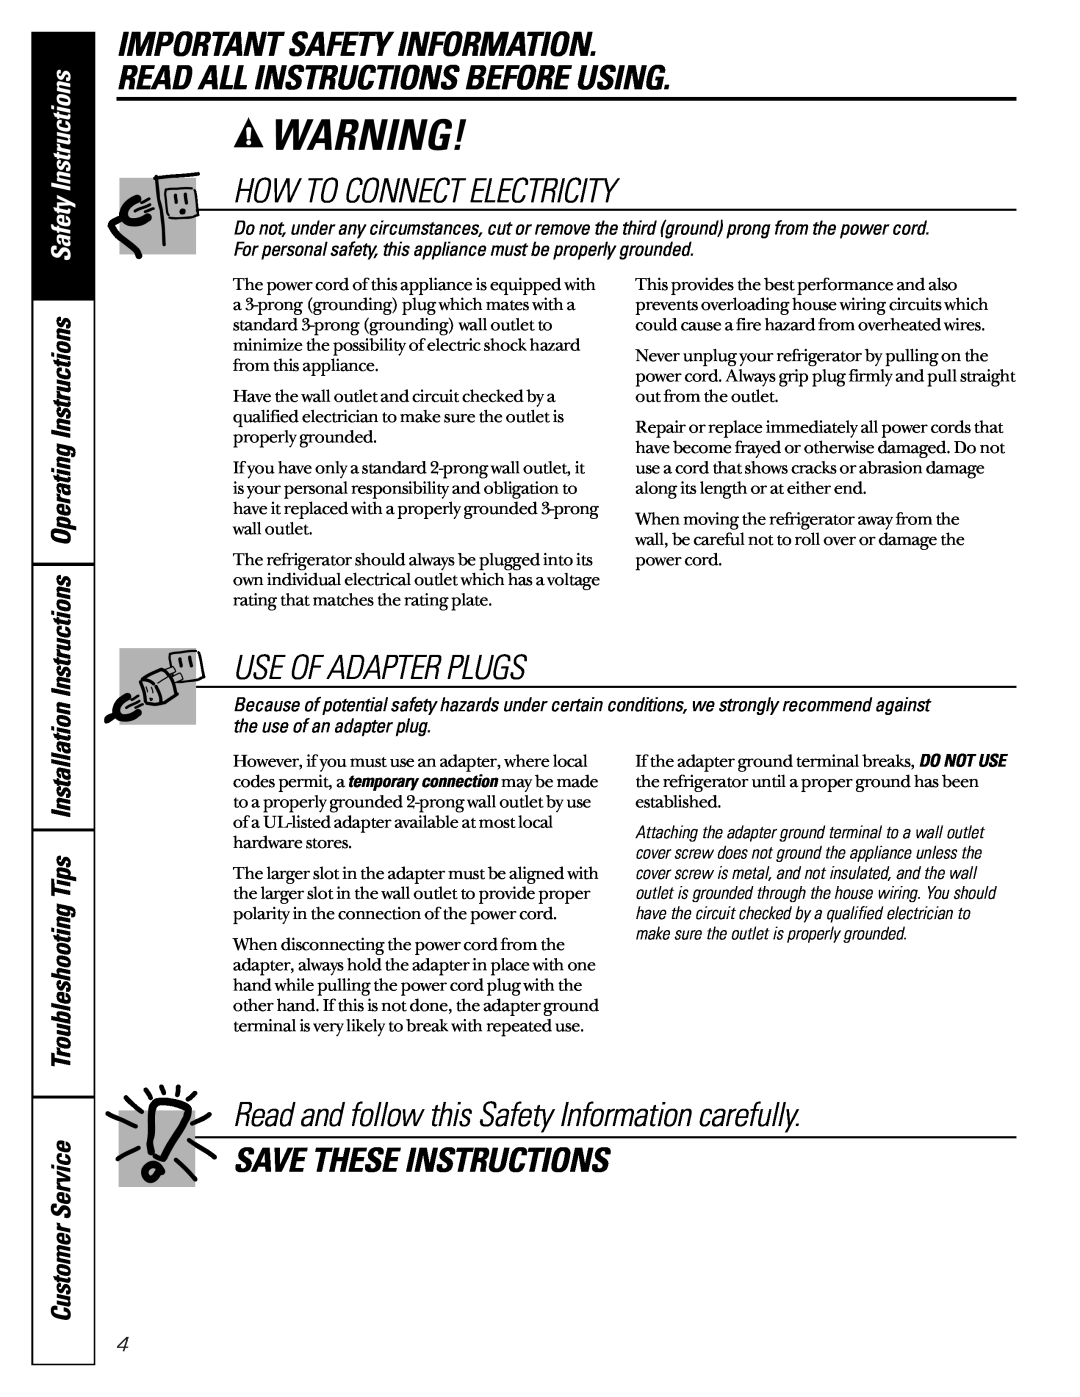 GE and 4 How To Connect Electricity, Use Of Adapter Plugs, Save These Instructions, OperatingInstructions, CustomerService 